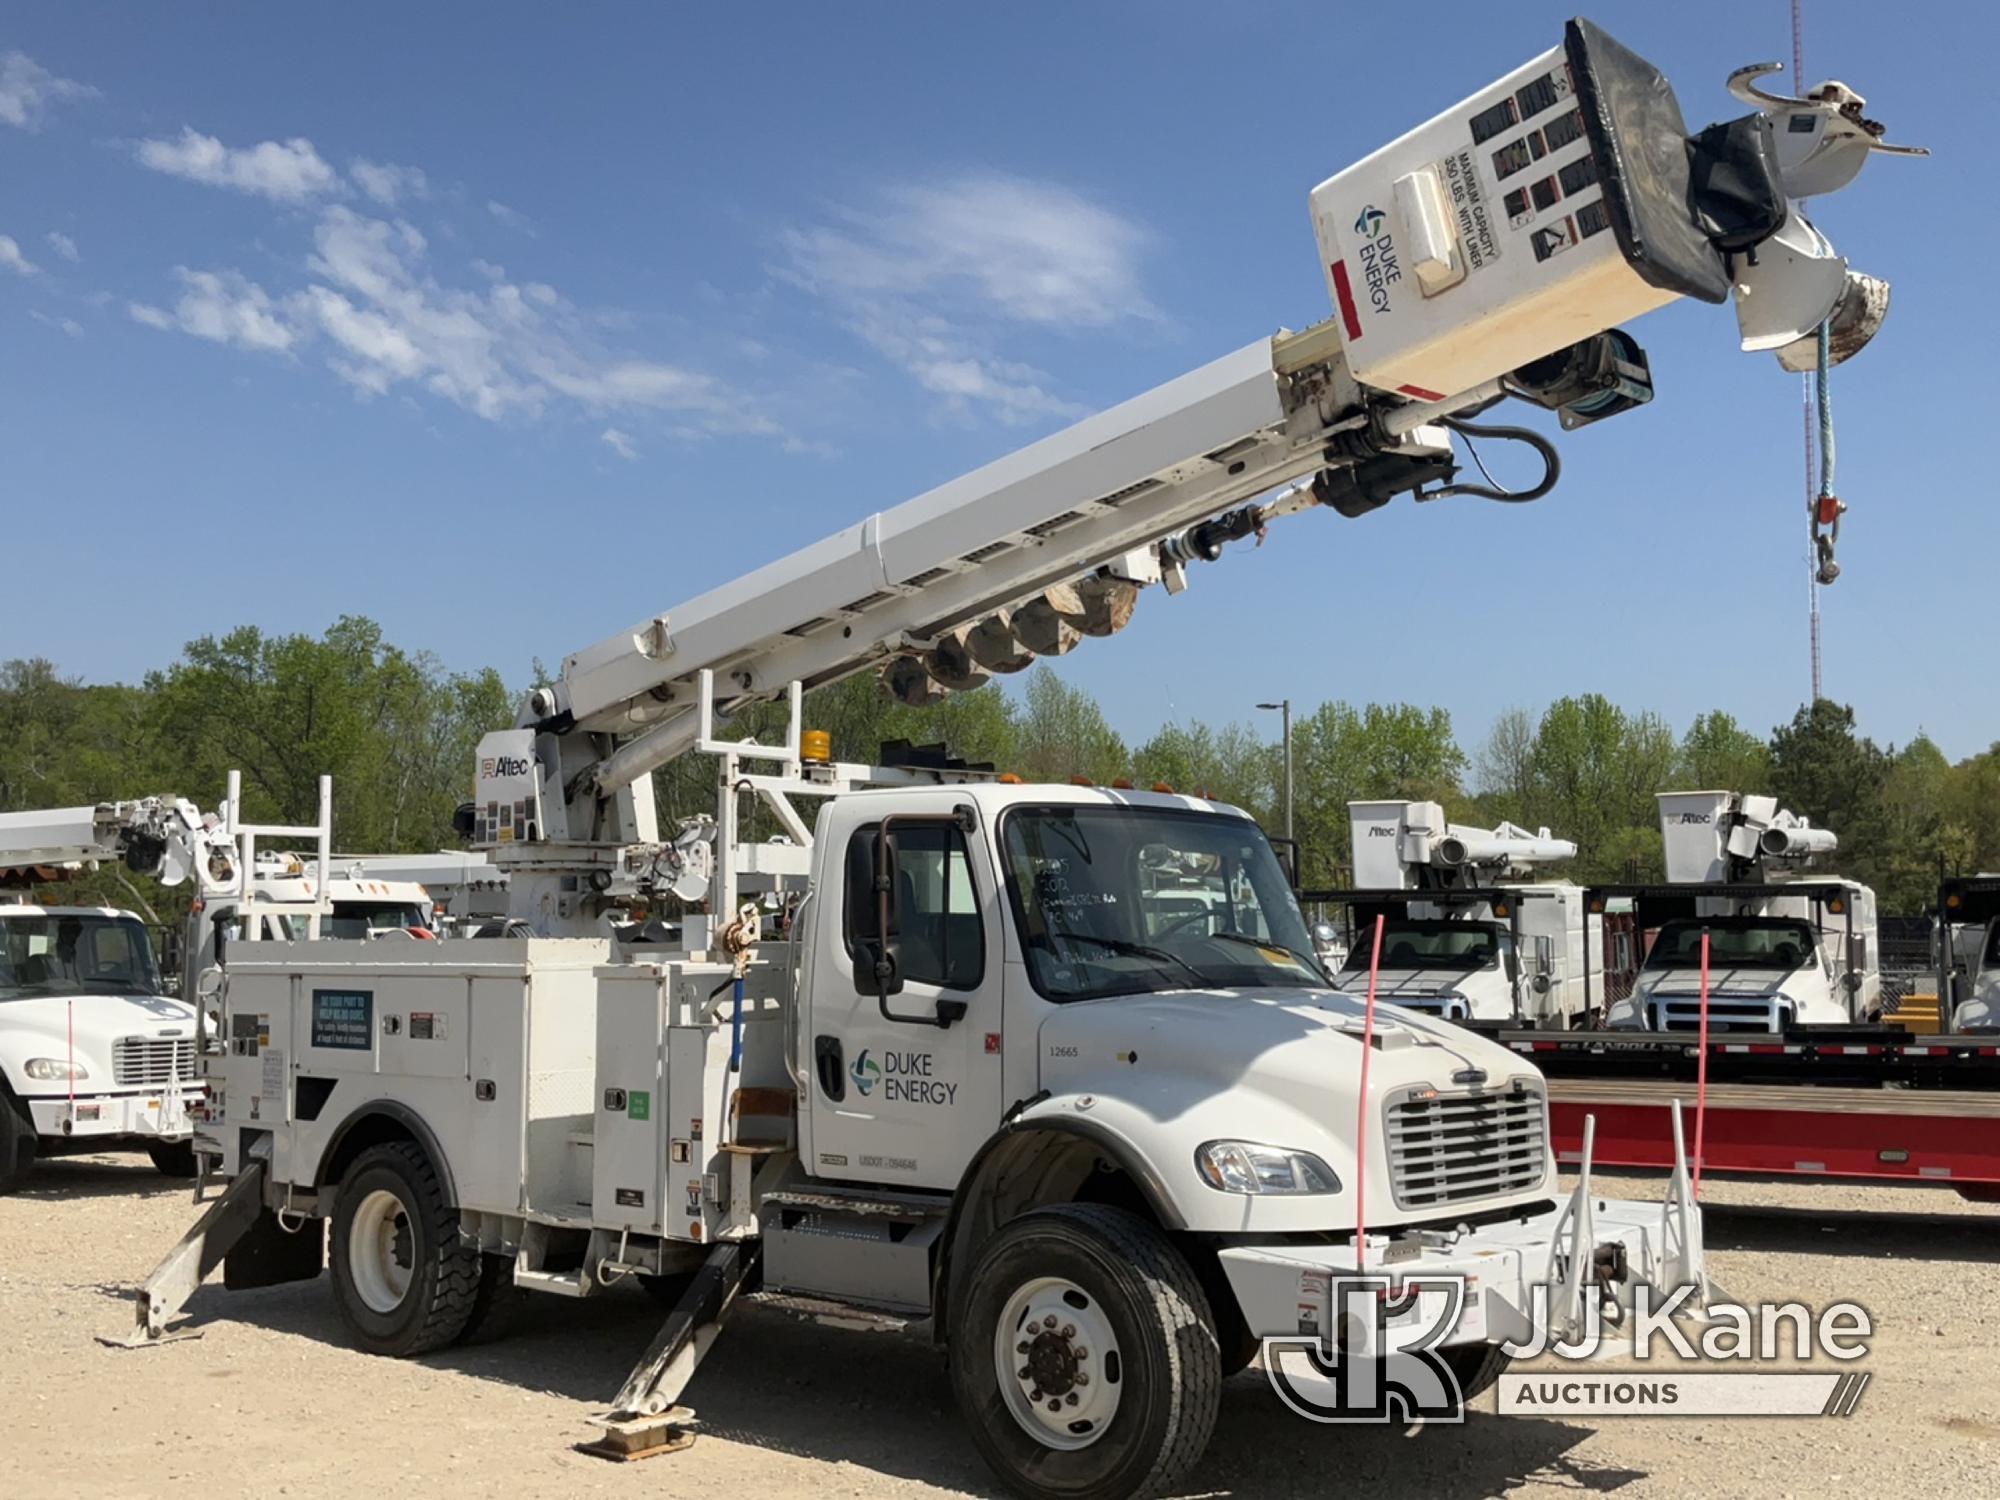 (Charlotte, NC) Altec DM47-BR, Digger Derrick rear mounted on 2012 Freightliner M2 106 4x4 Utility T